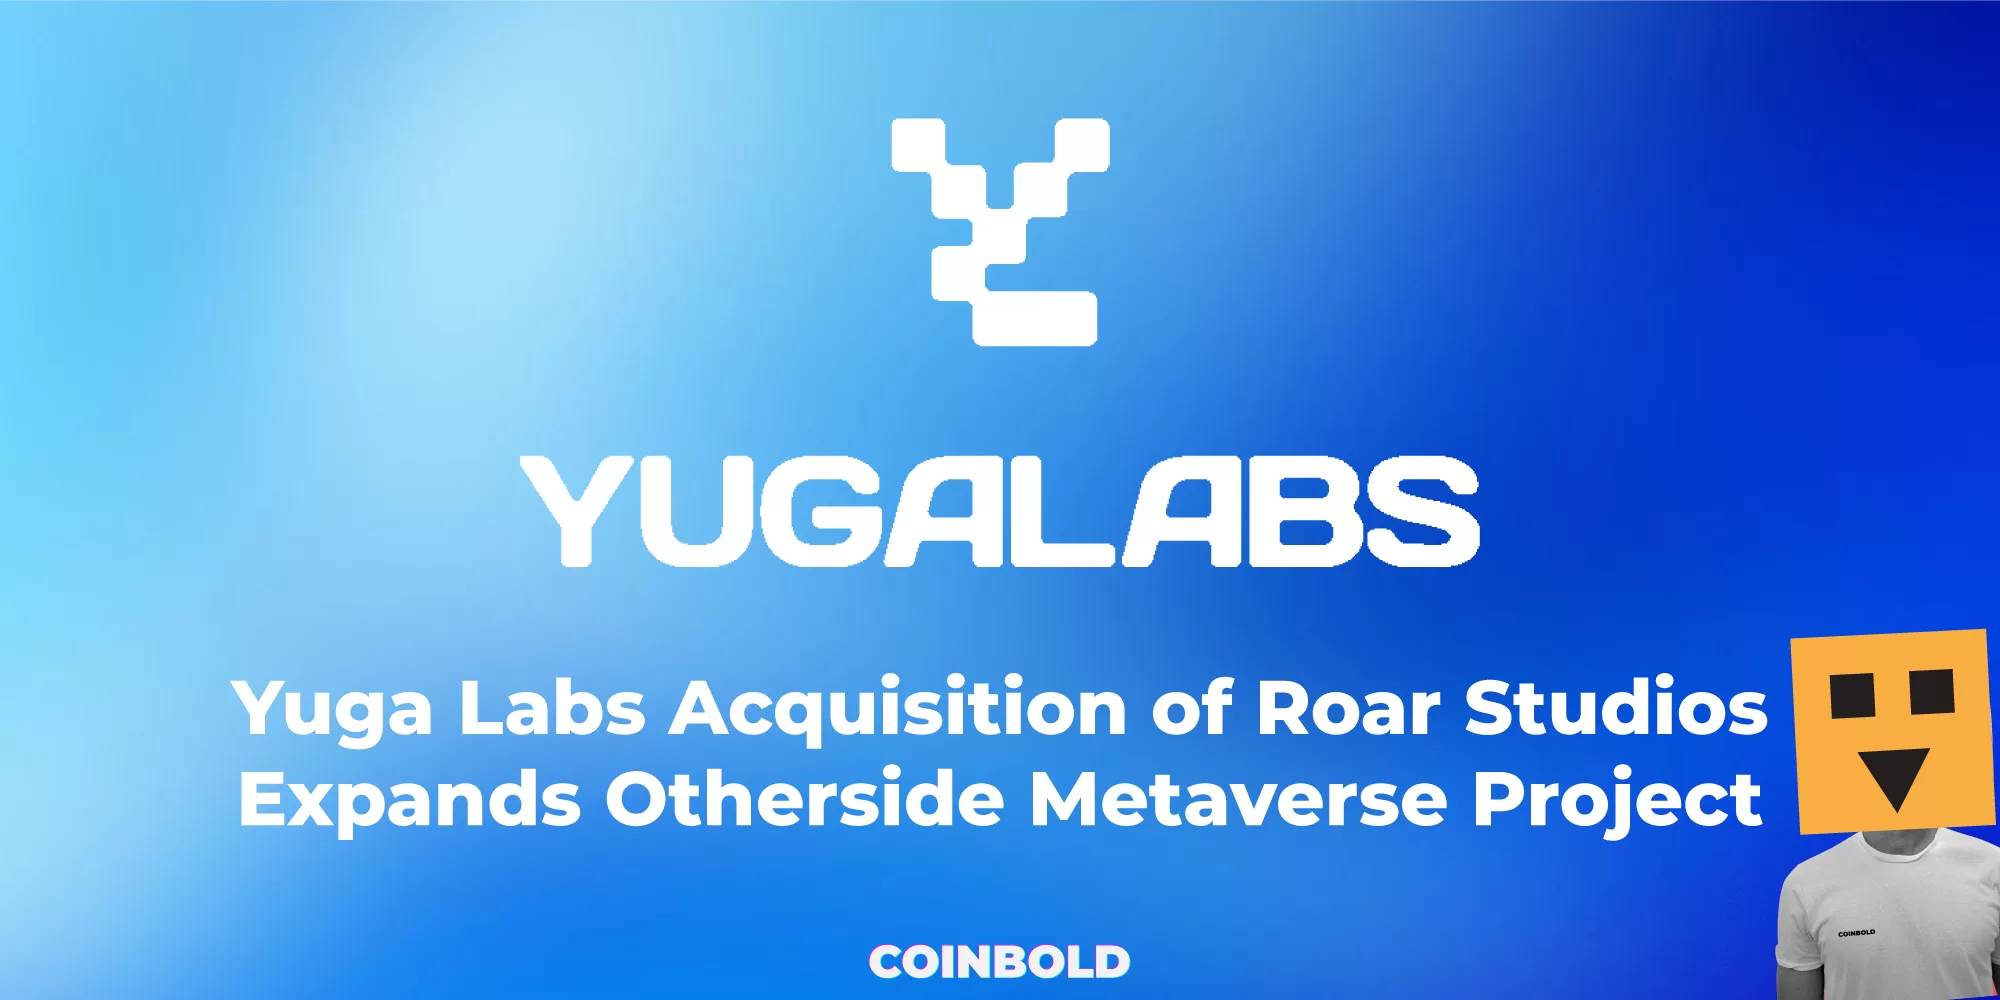 Yuga Labs Acquisition of Roar Studios Expands Otherside Metaverse Project